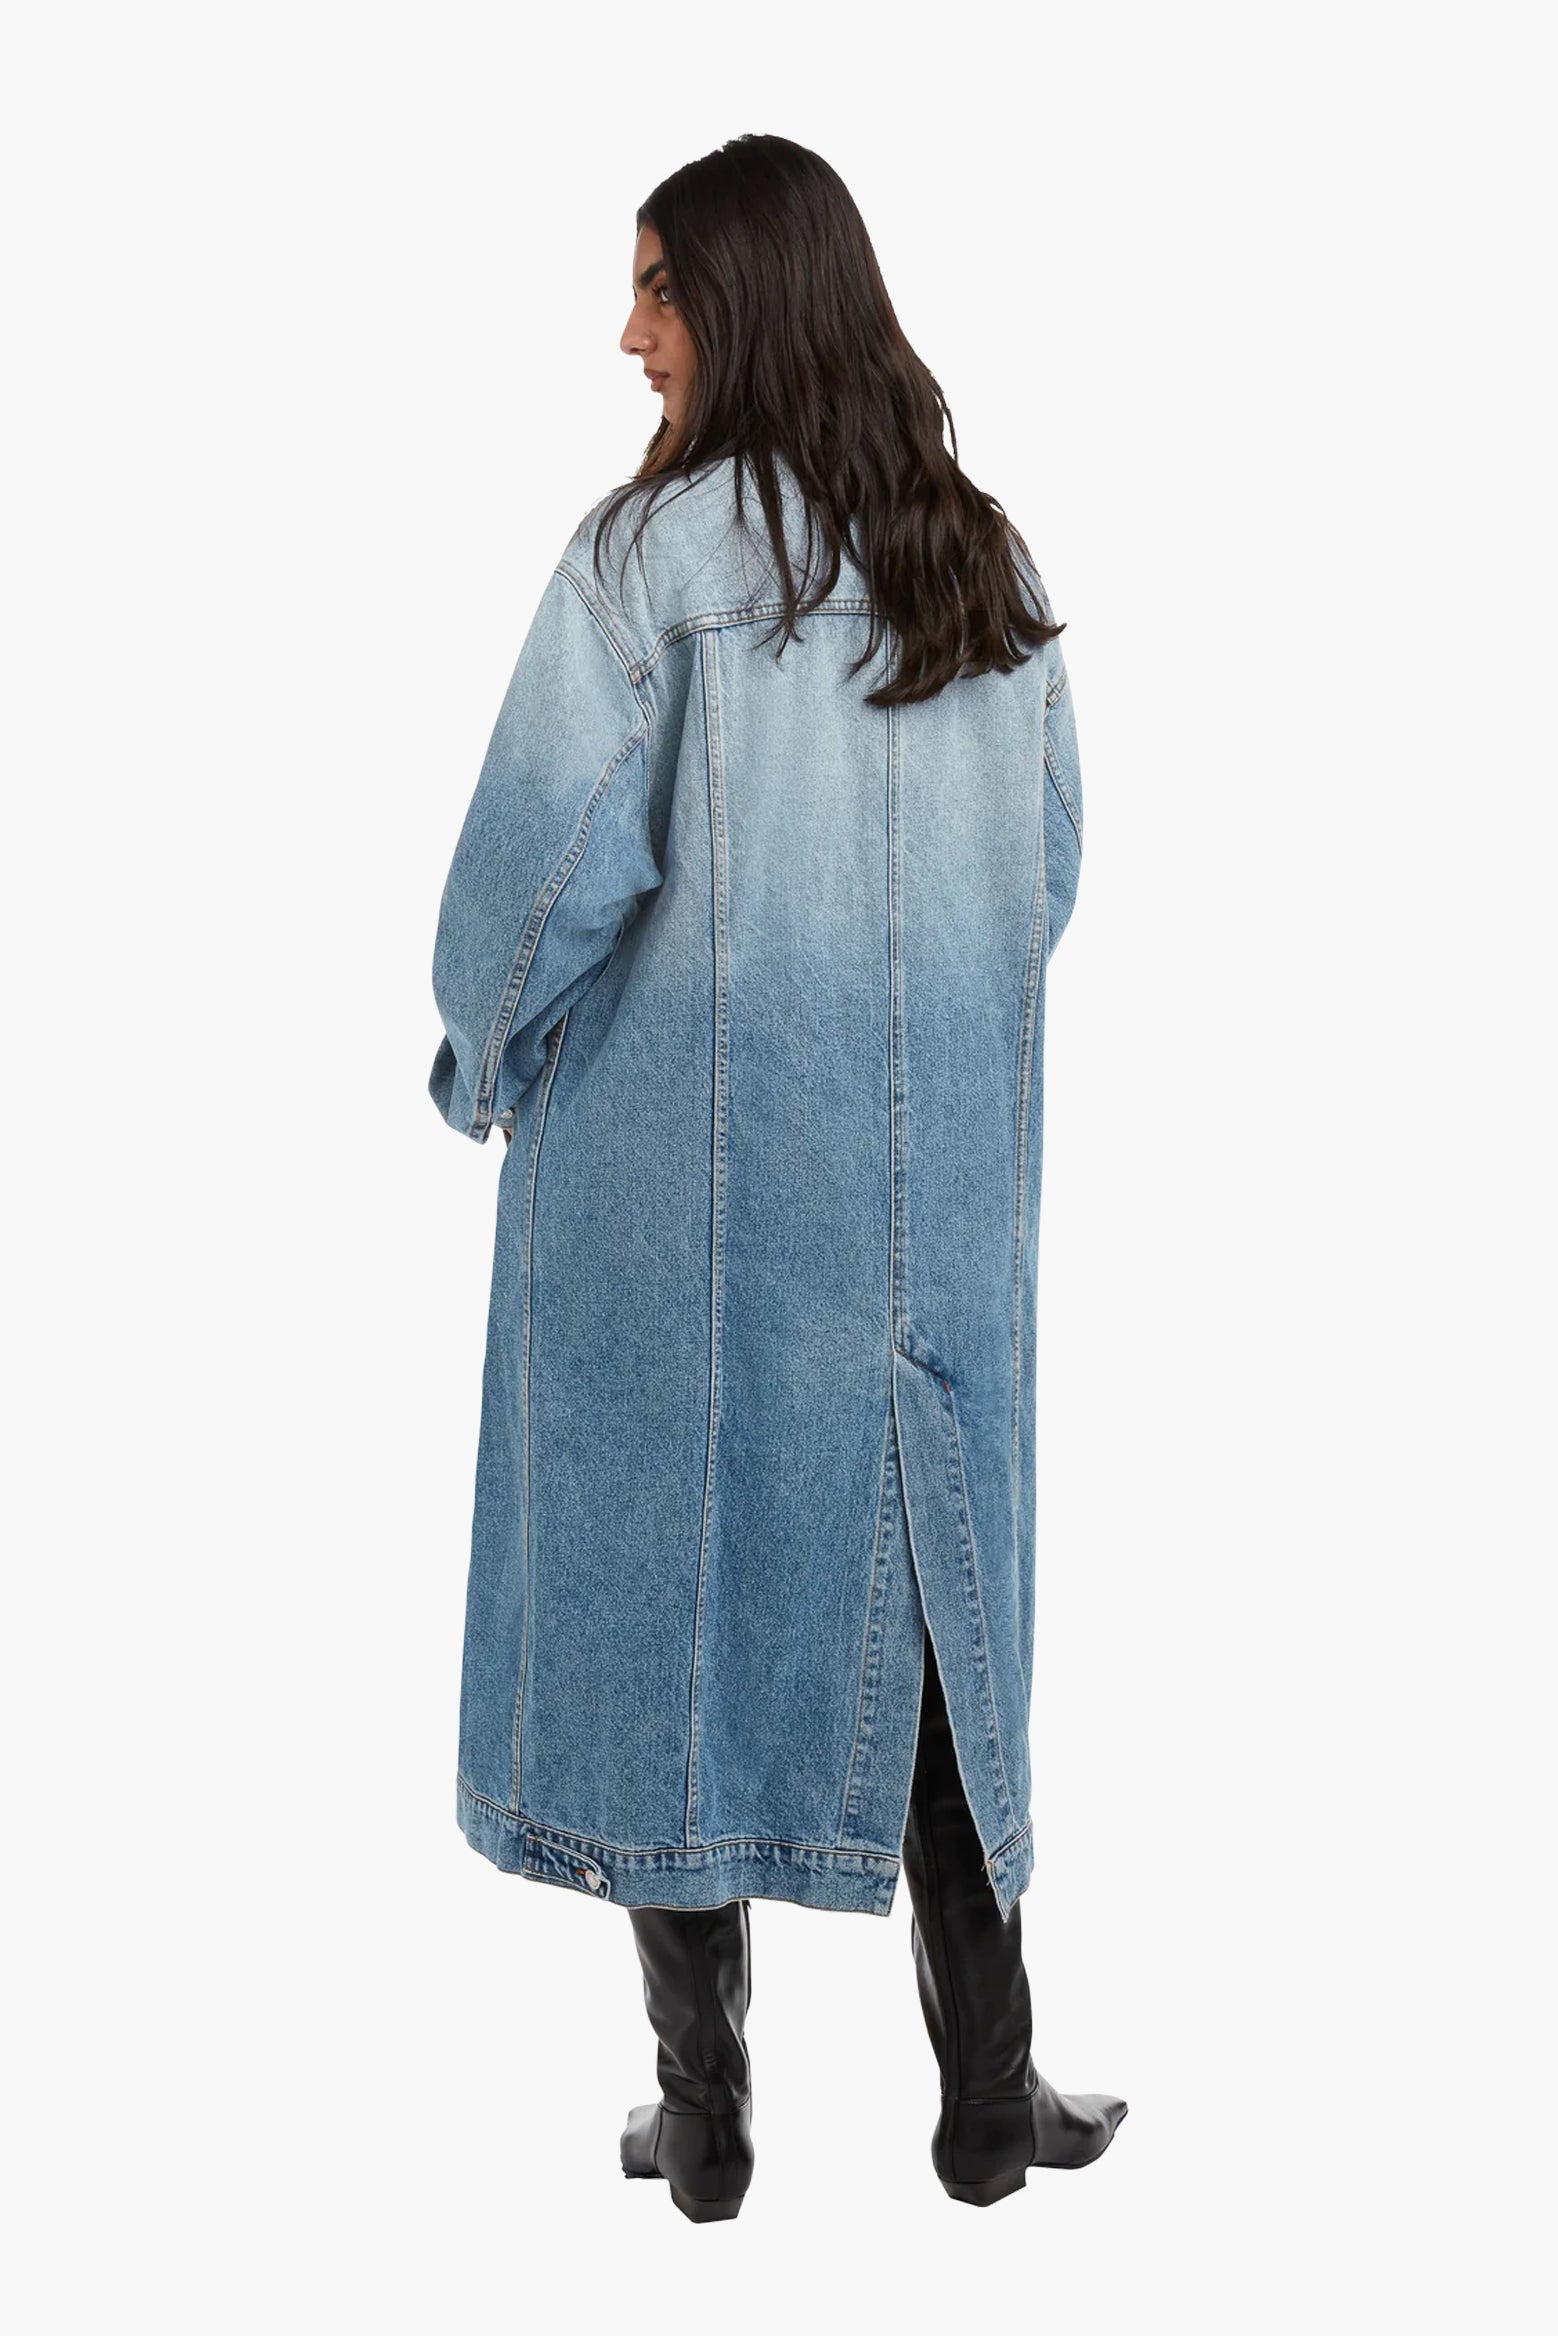 EB Denim Webster Trench in Luca available at The New Trend Australia.